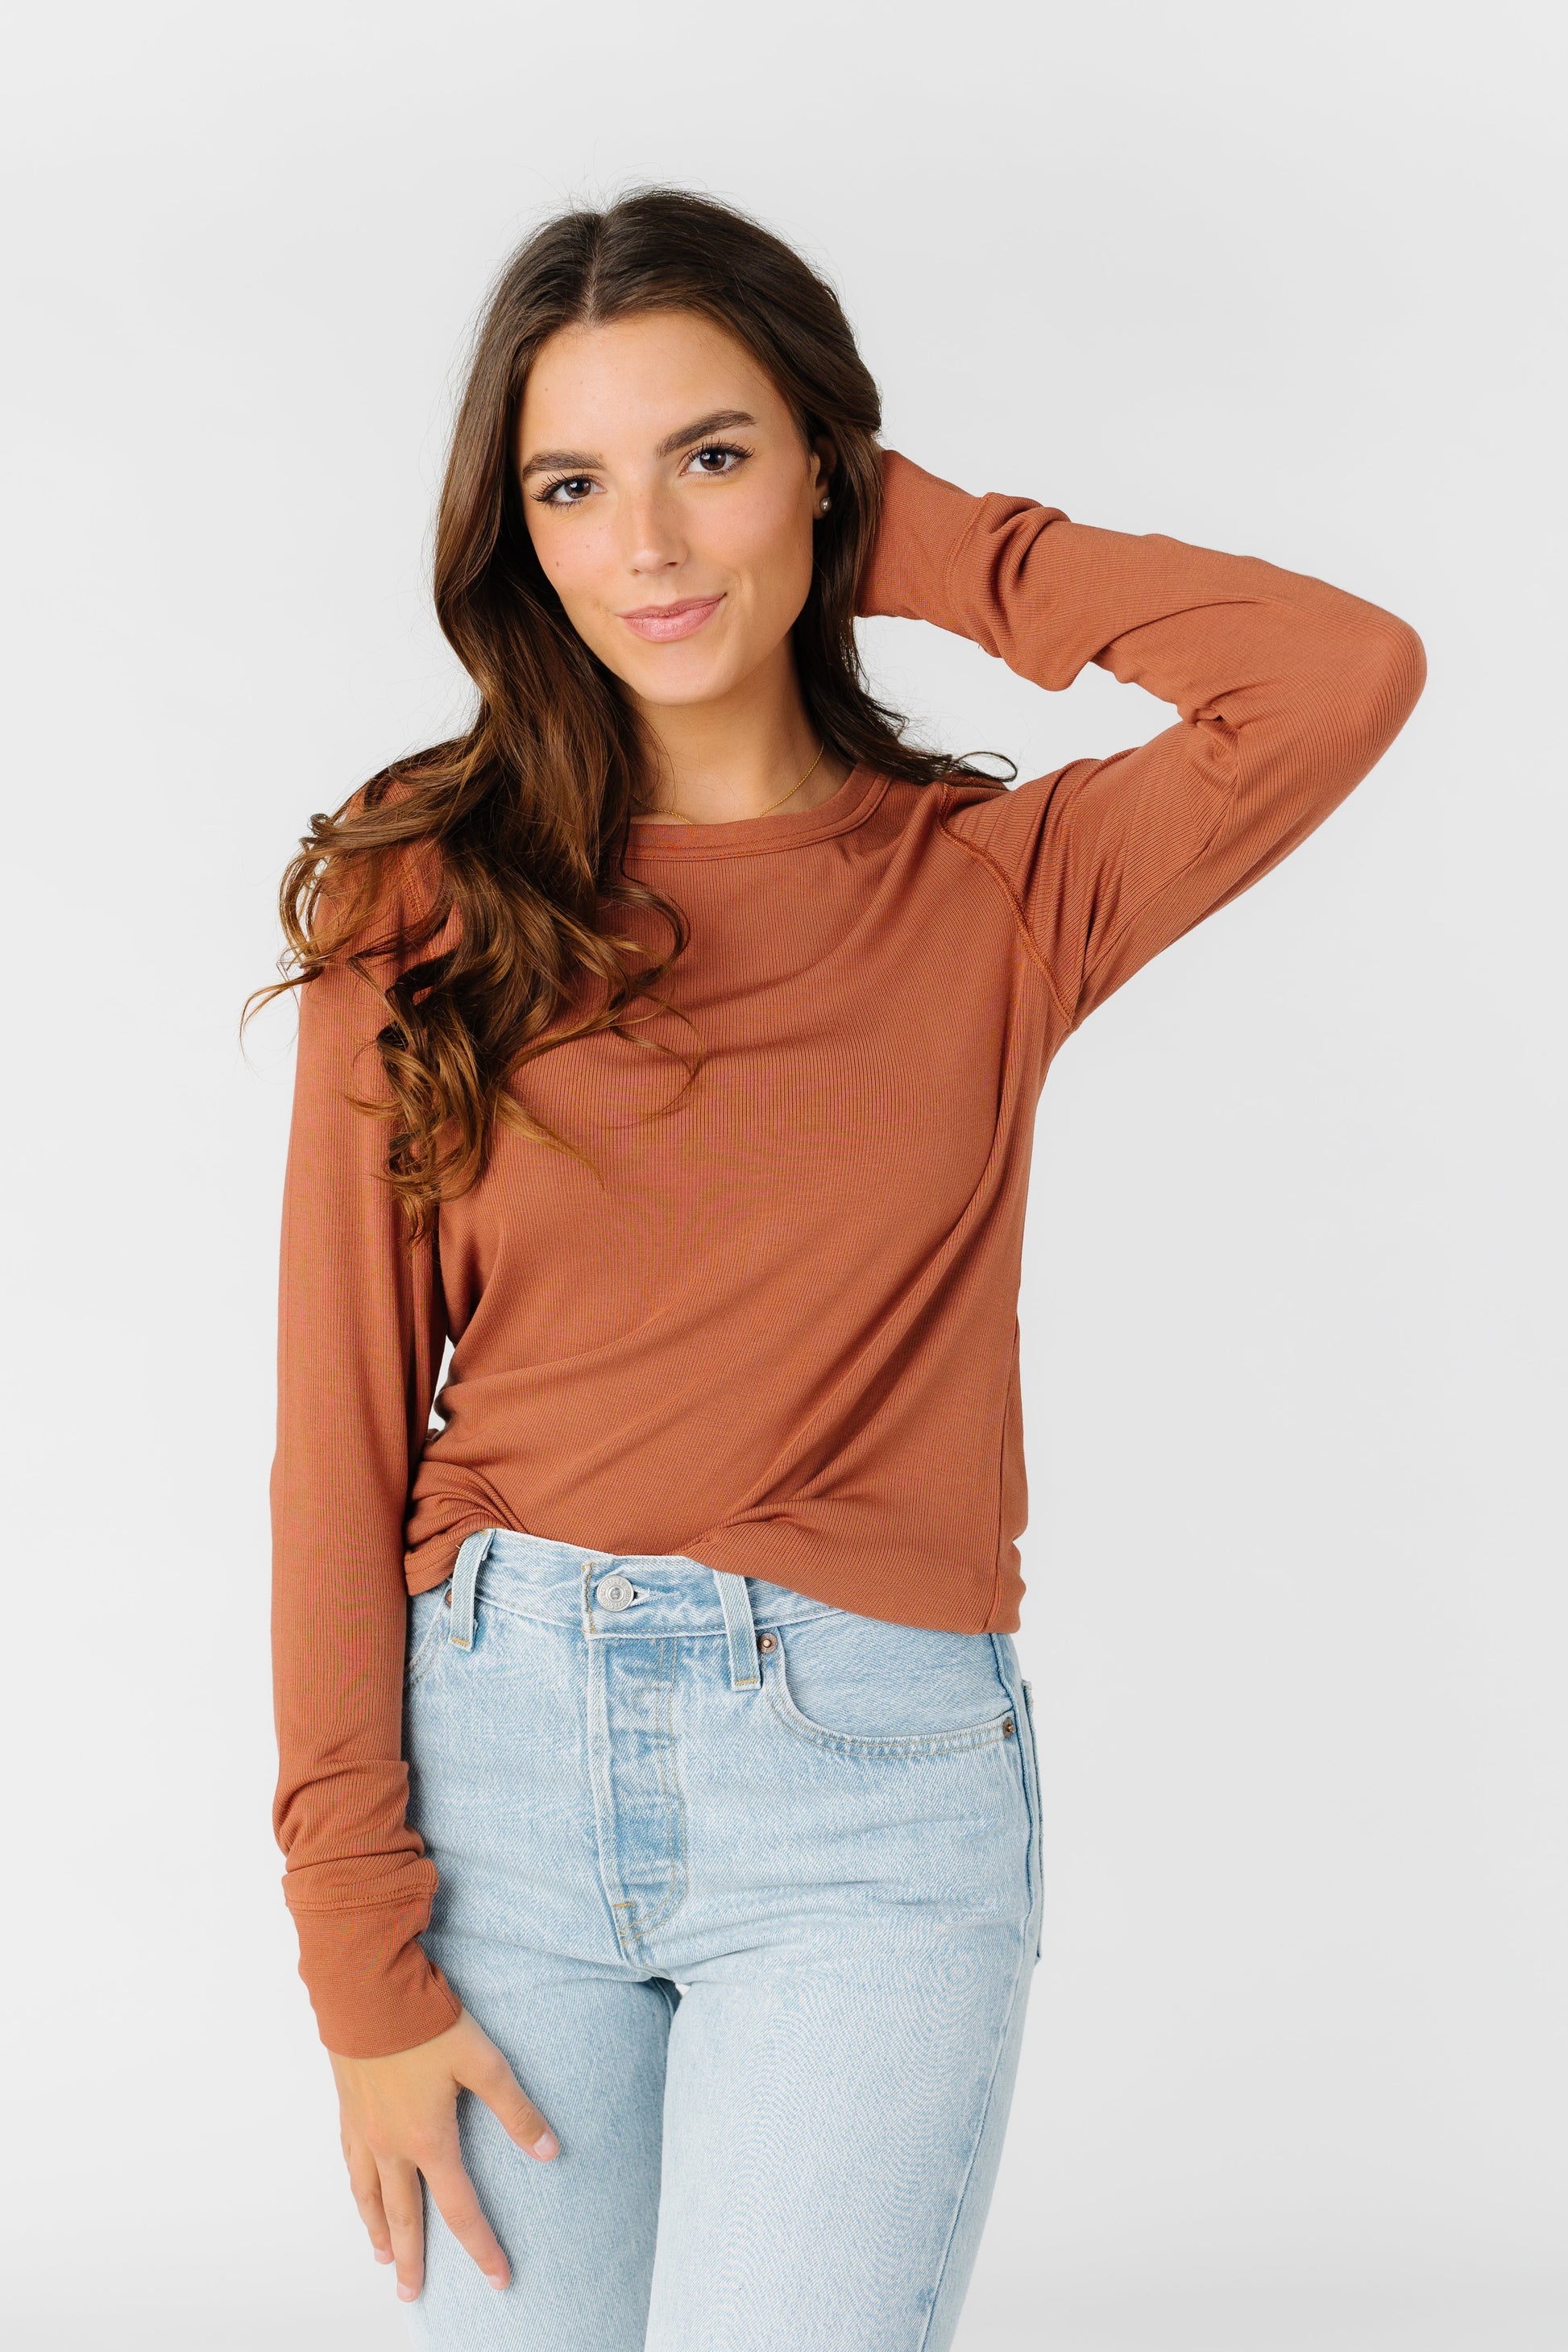 Stacy Top - Rustic Brown Women's Long Sleeve T Thread & Supply Rustic Brown L 